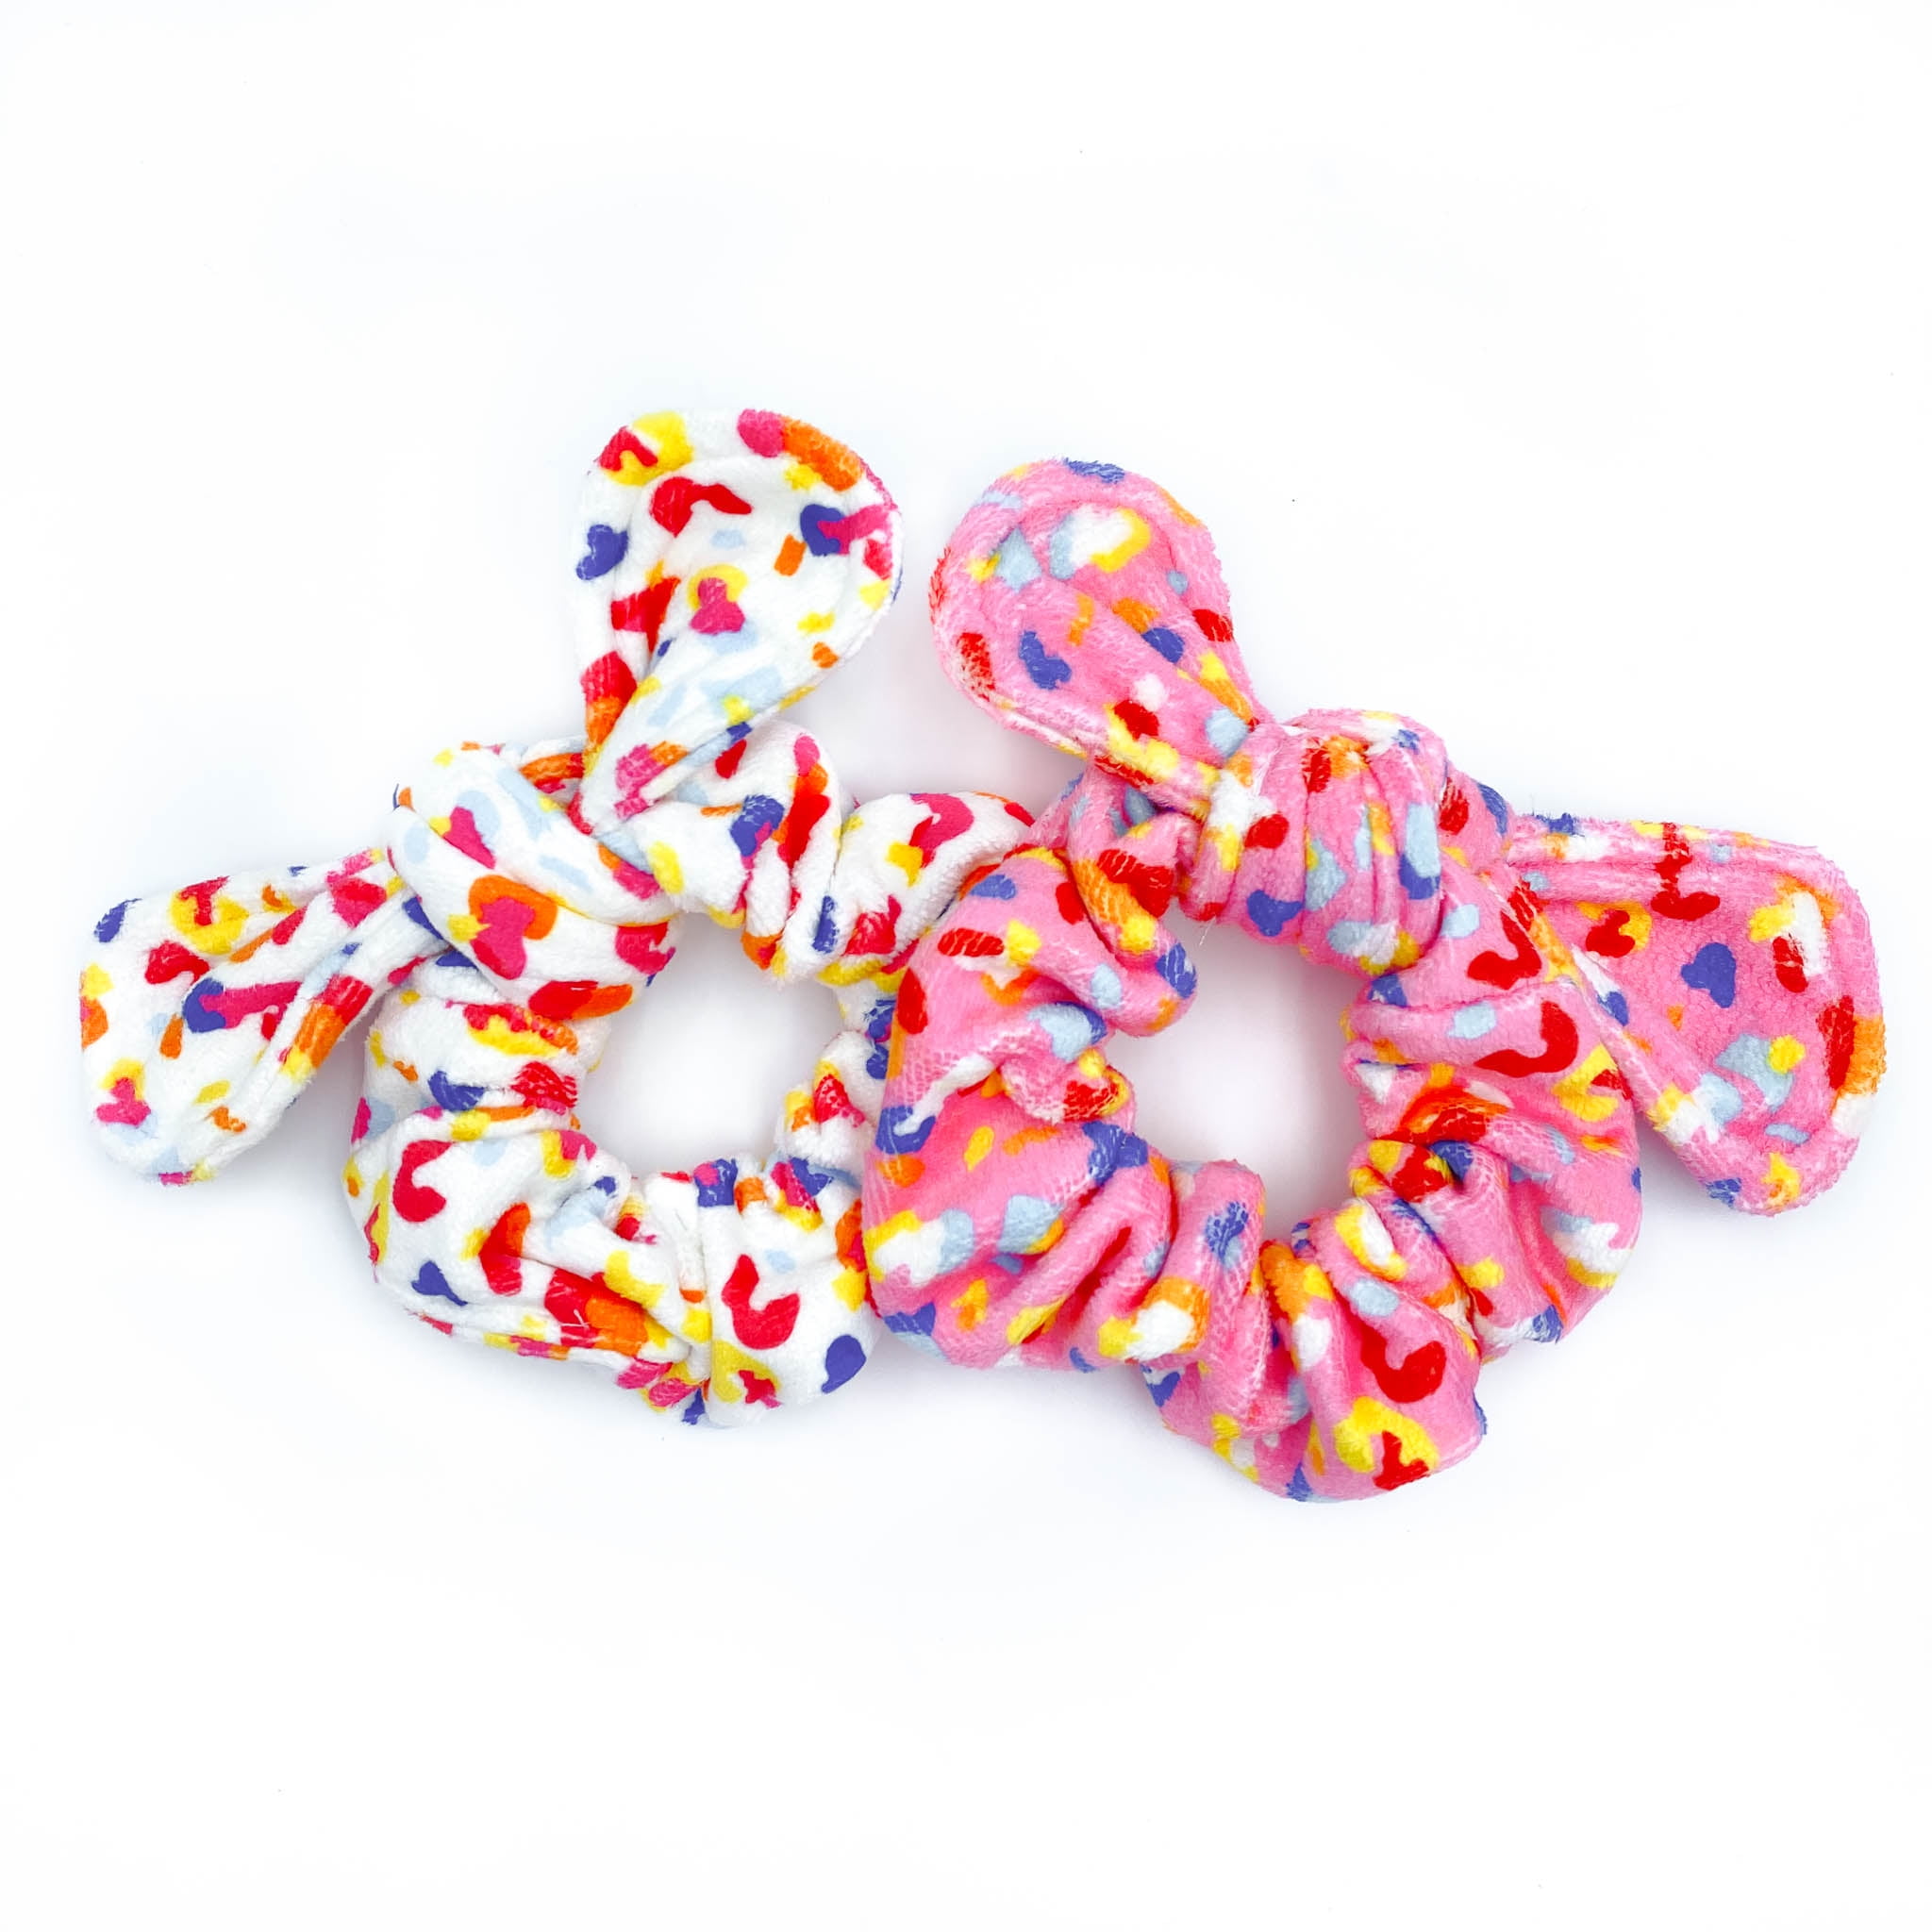 Packed Party Wet Hair Dont Care White and Pink Polka Dot Microfiber Moisture-Wicking Hair Scrunchies, Ponytail Holder, 2 CT.